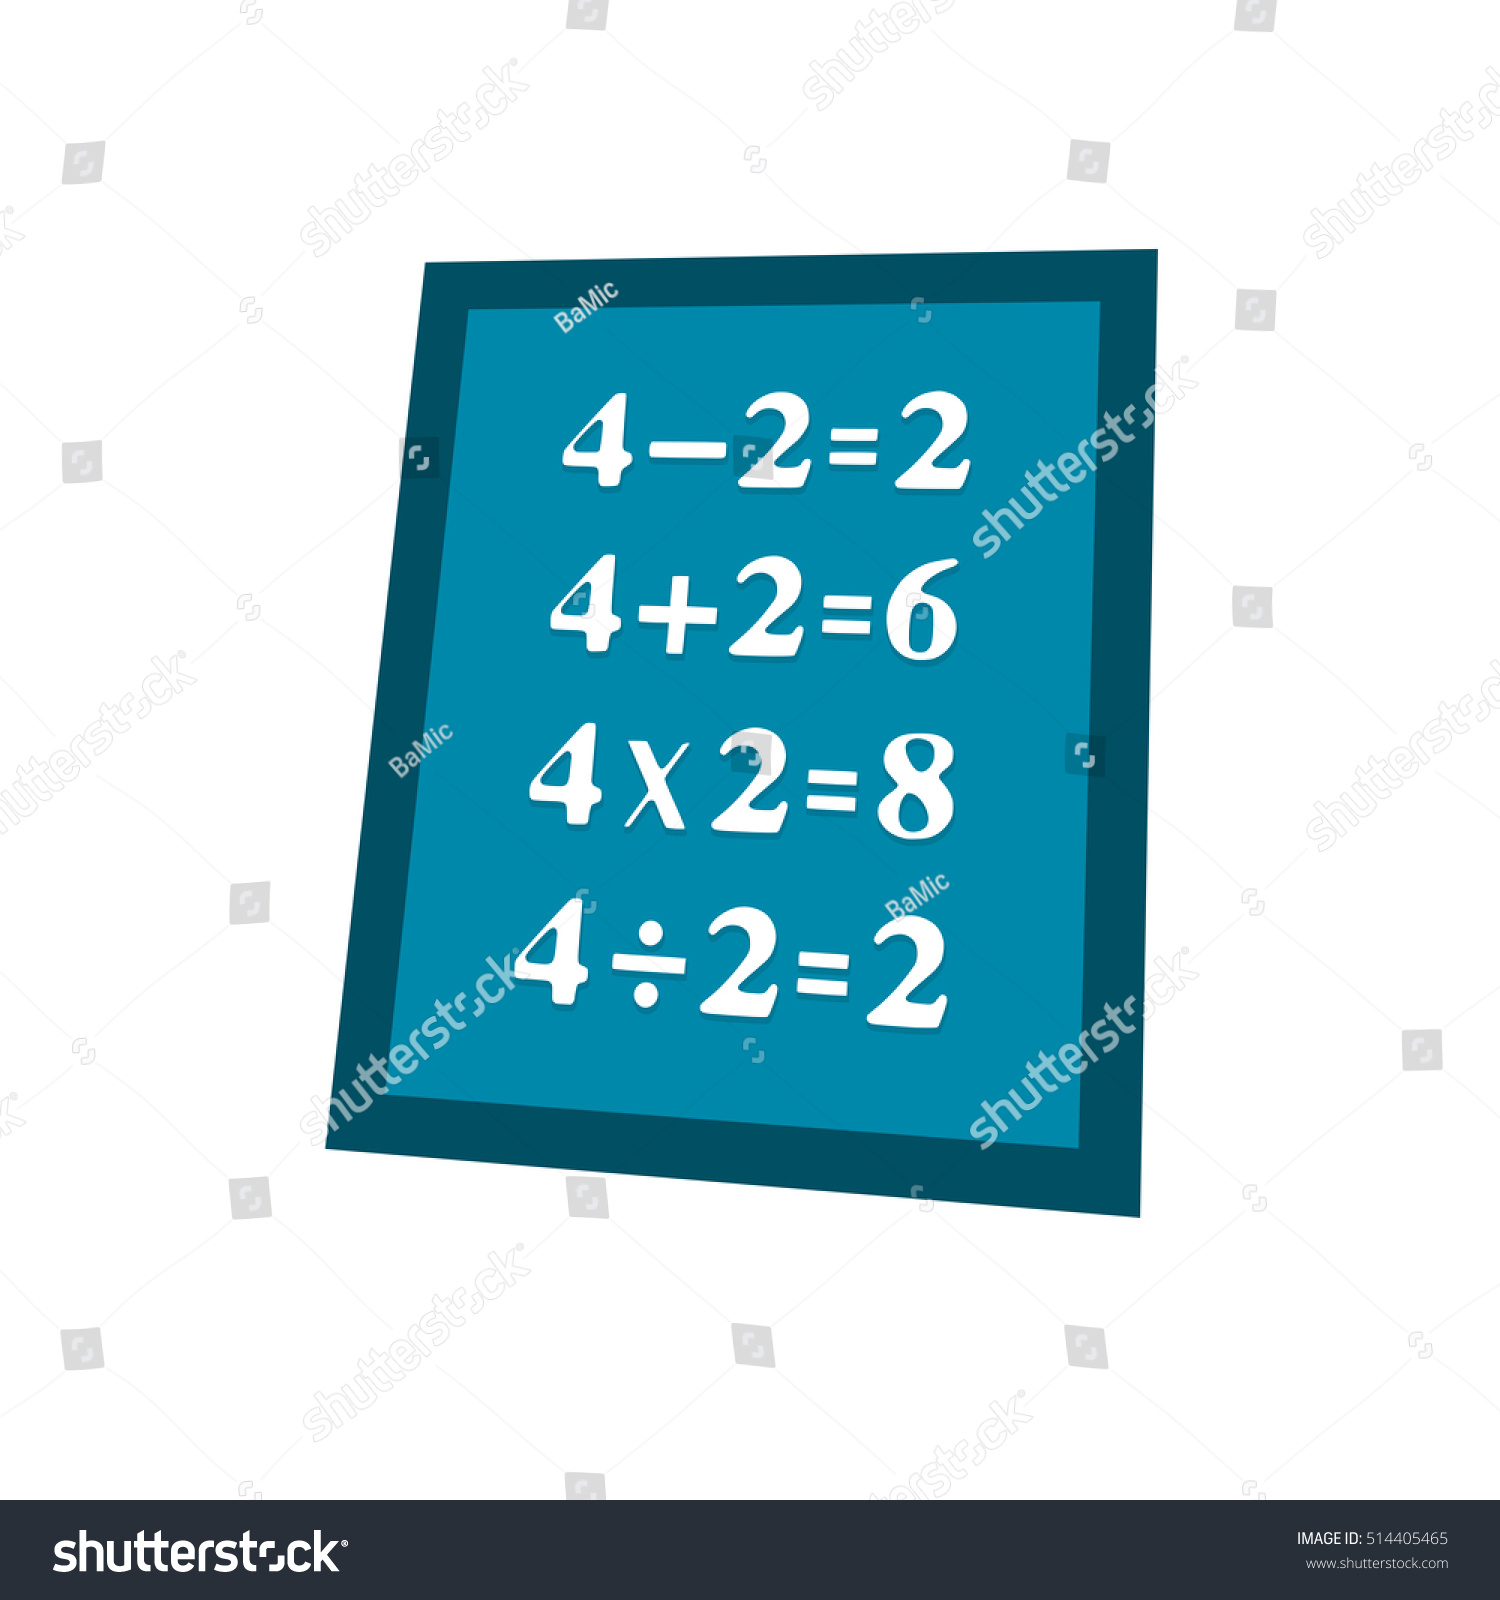 subtraction-addition-multiplication-division-operations-on-stock-illustration-514405465